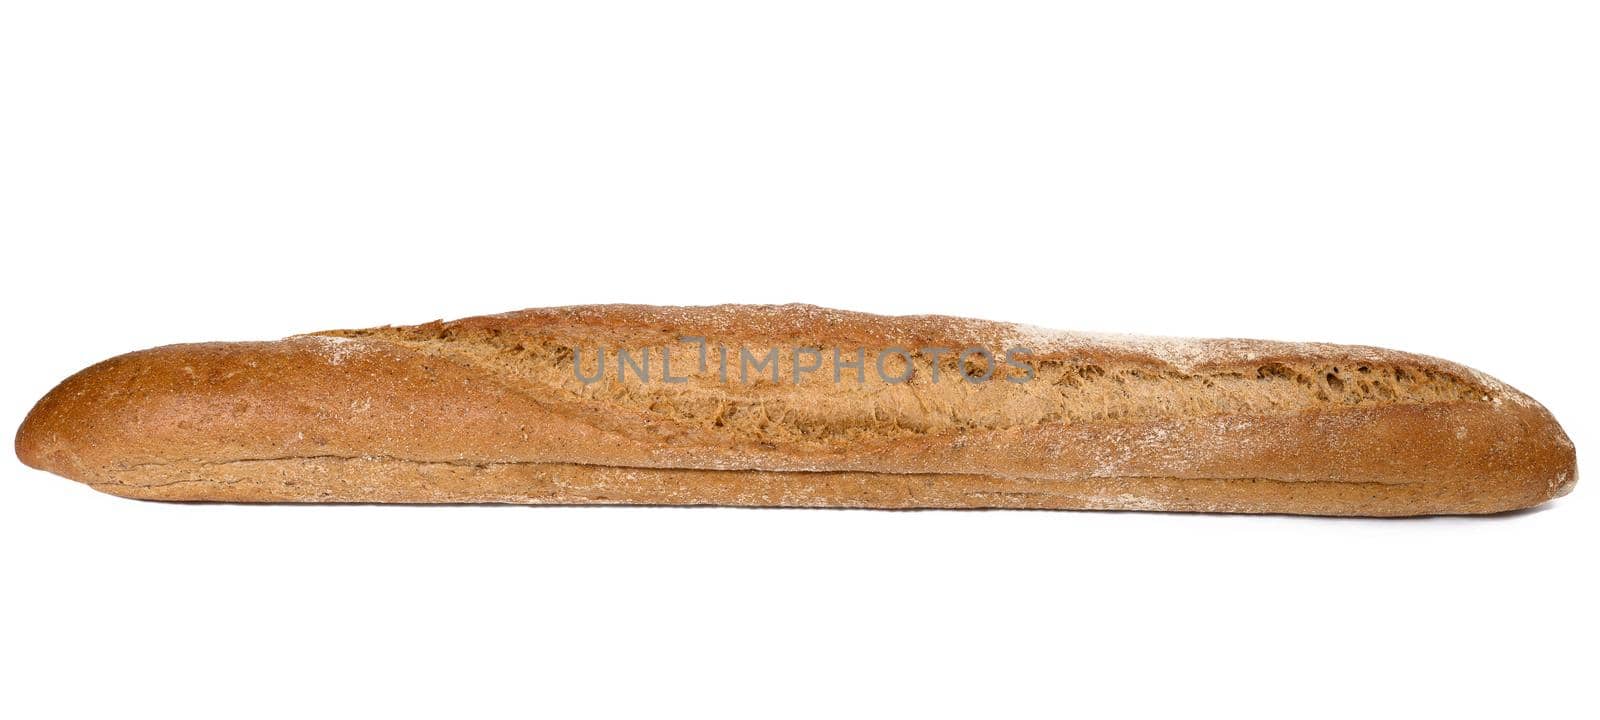 oblong baked bread baguette isolated on white background, loaf of rye flour, close up